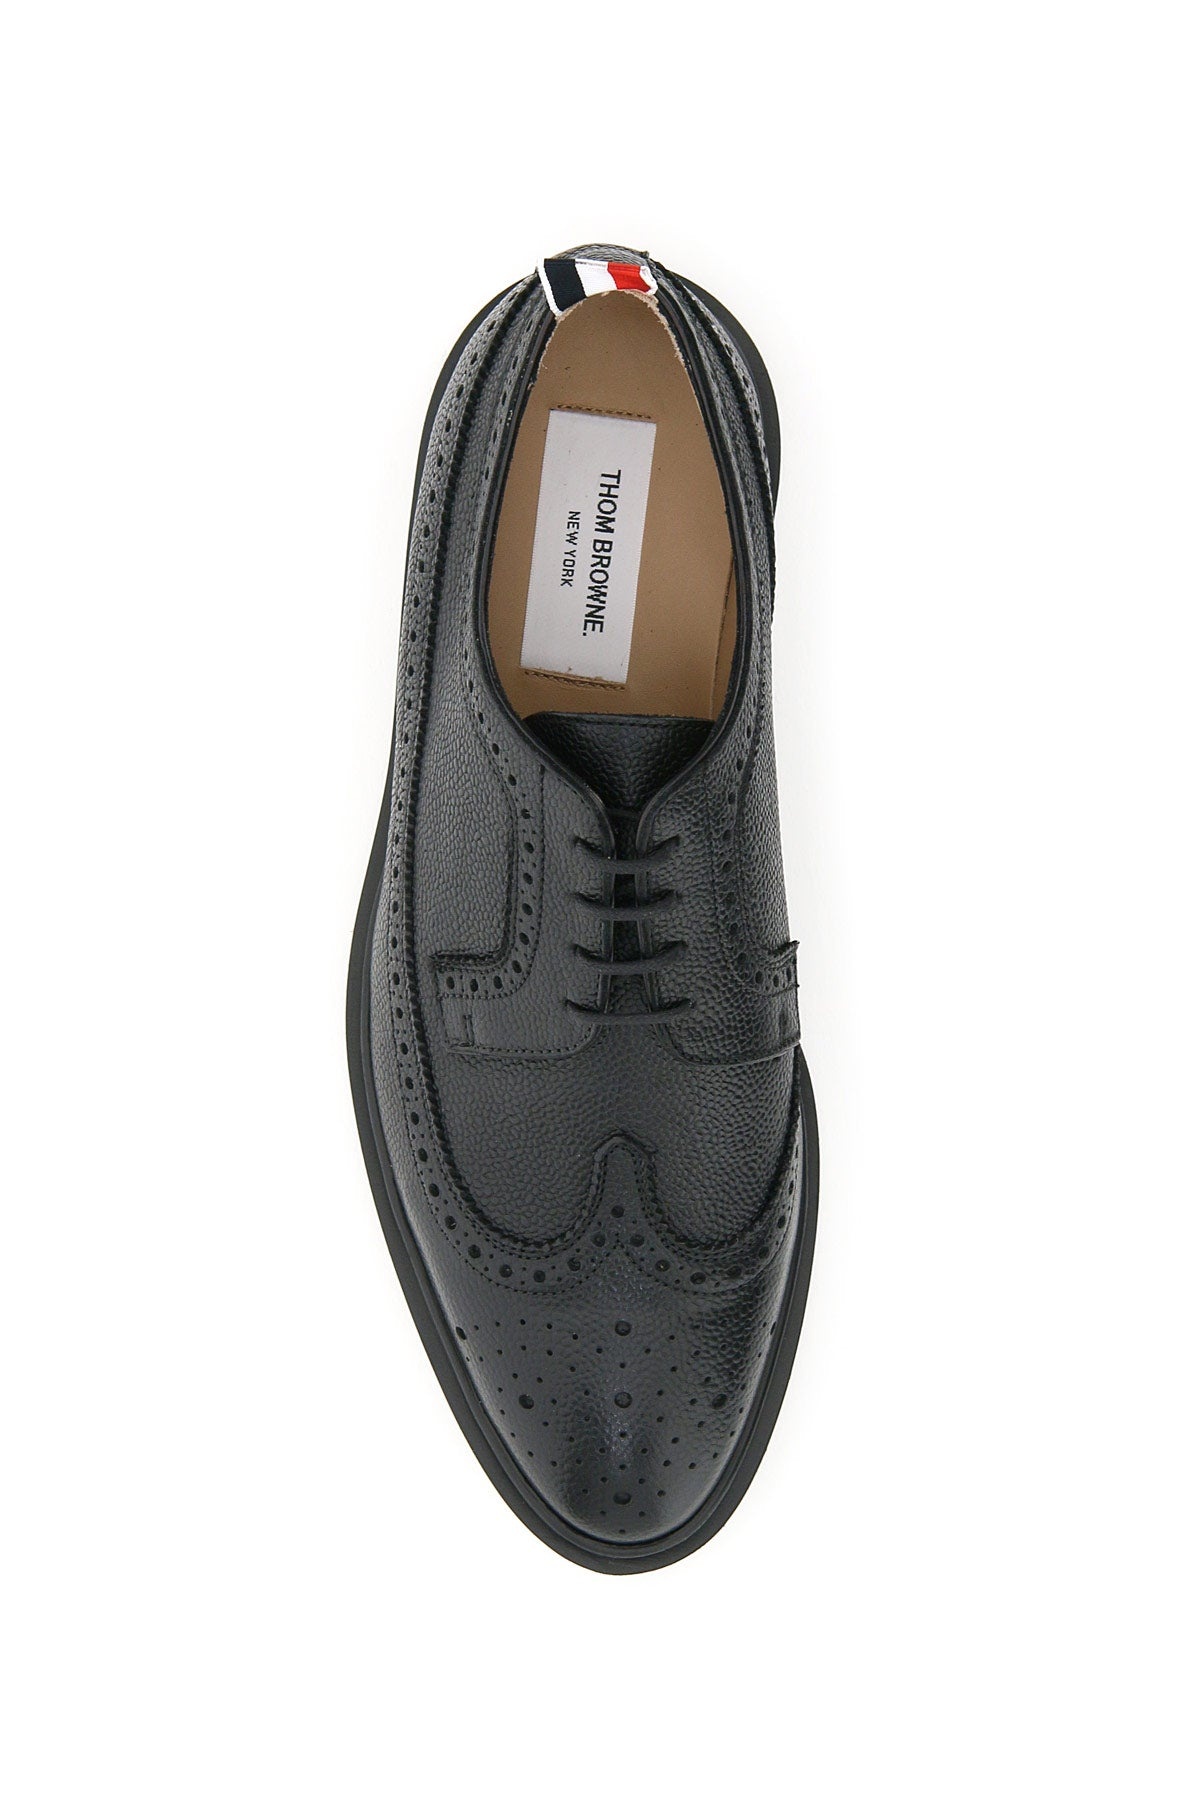 Thom Browne Longwing Brogue Lace-Up Shoes Men - 2